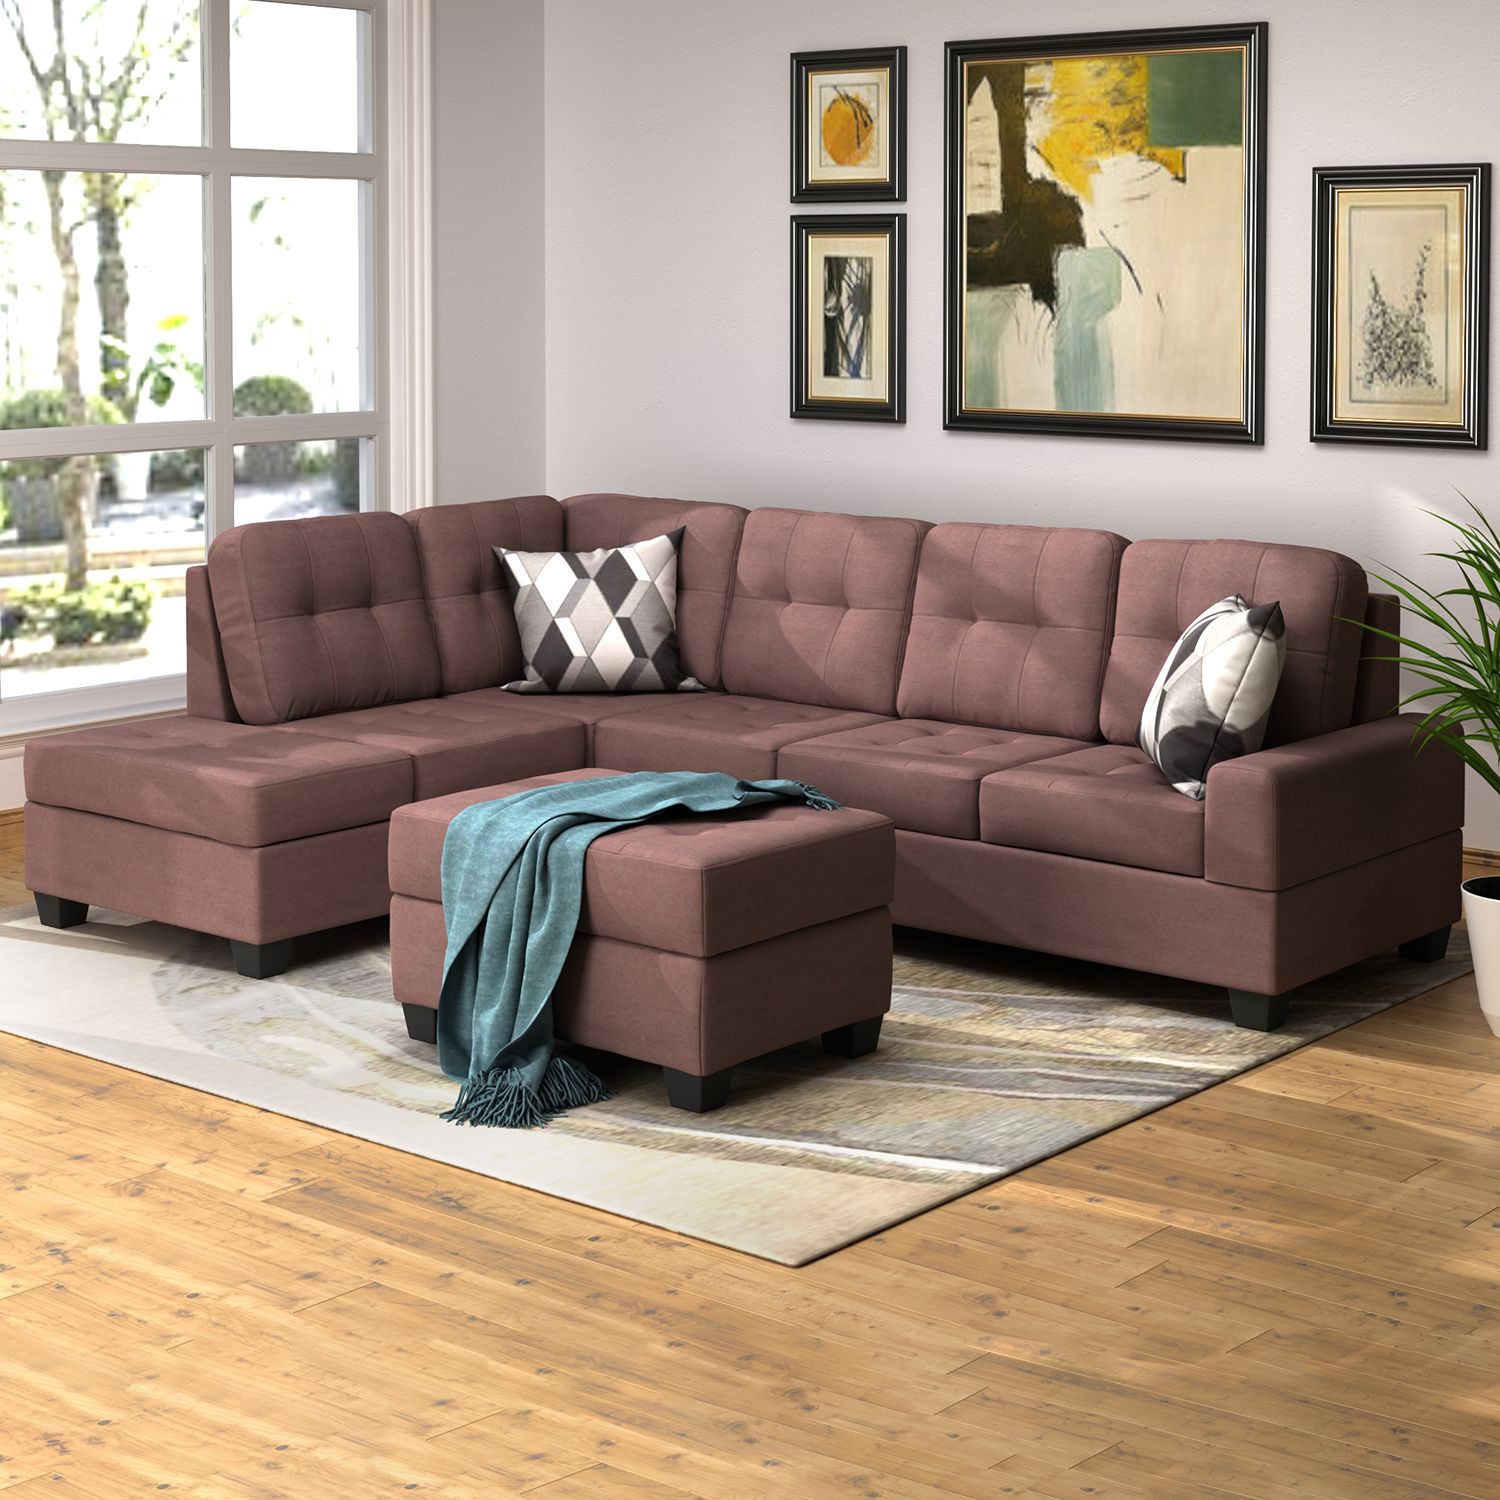 3 Piece Sectional Sofa Microfiber With Reversible Chaise In 3pc Miles Leather Sectional Sofas With Chaise (View 5 of 15)